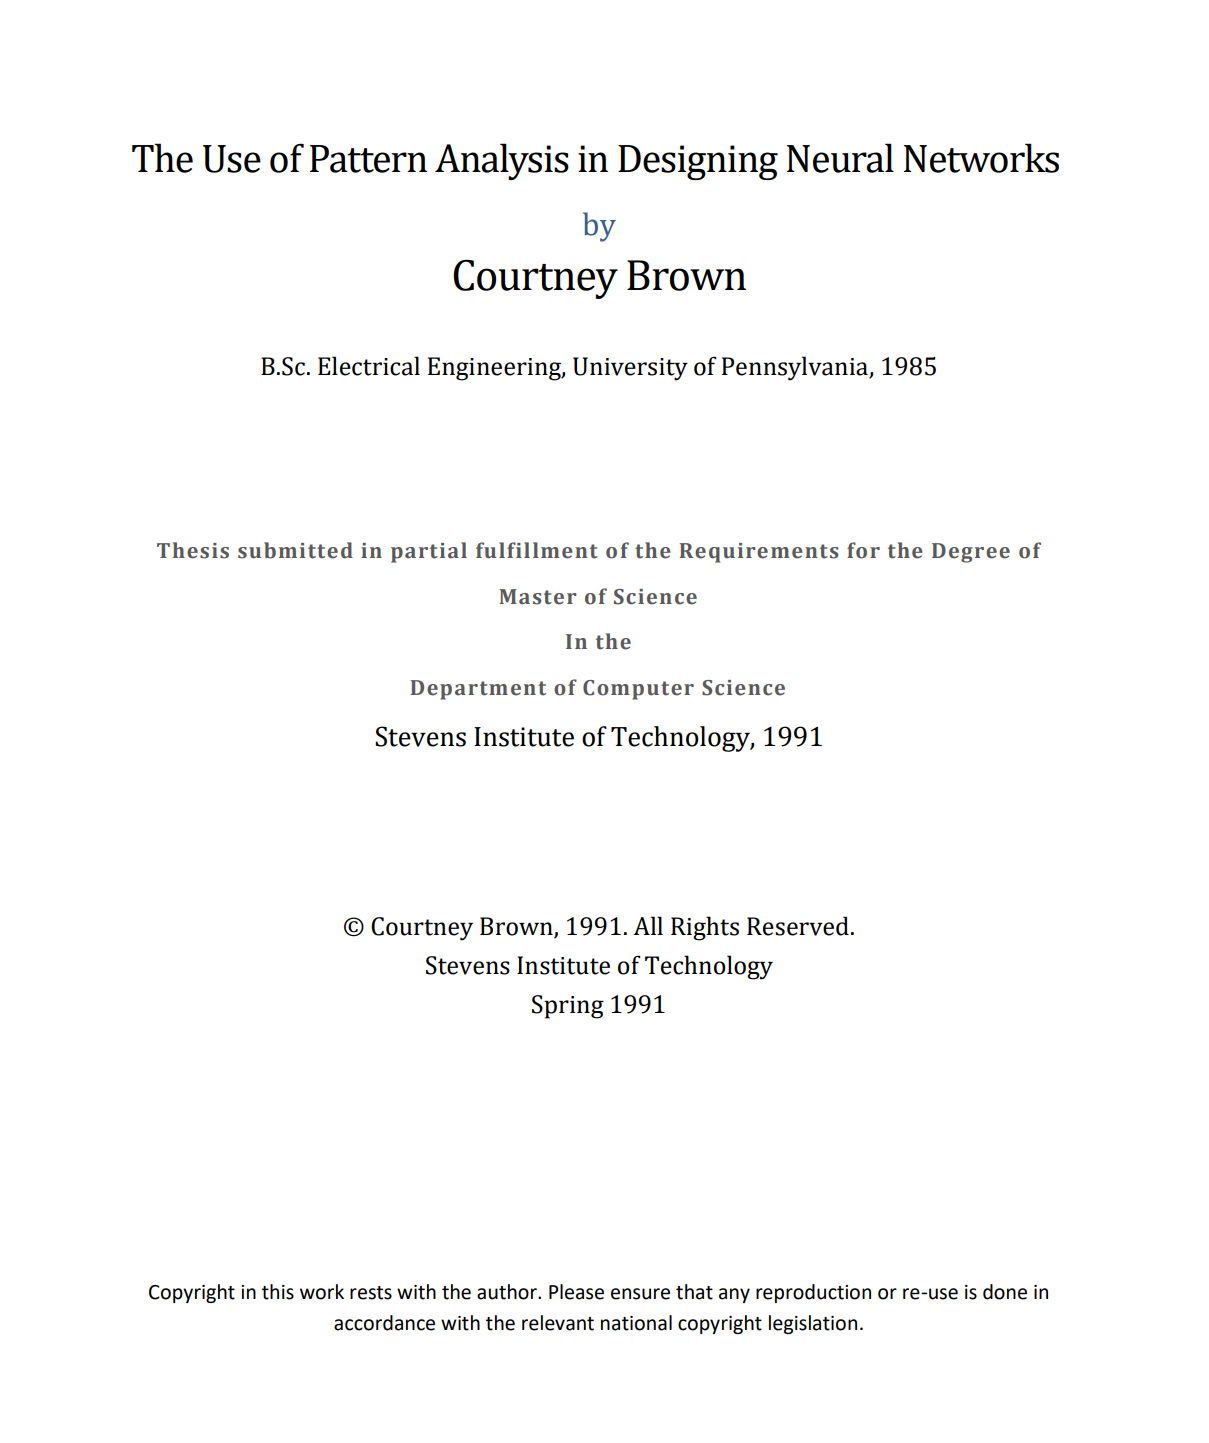 Cover for Thesis Use of Patterna Analysis in Designing Neural Networks by Courtney Brown submitted in partial fulfillment of the degree Master of Science in Computer Science